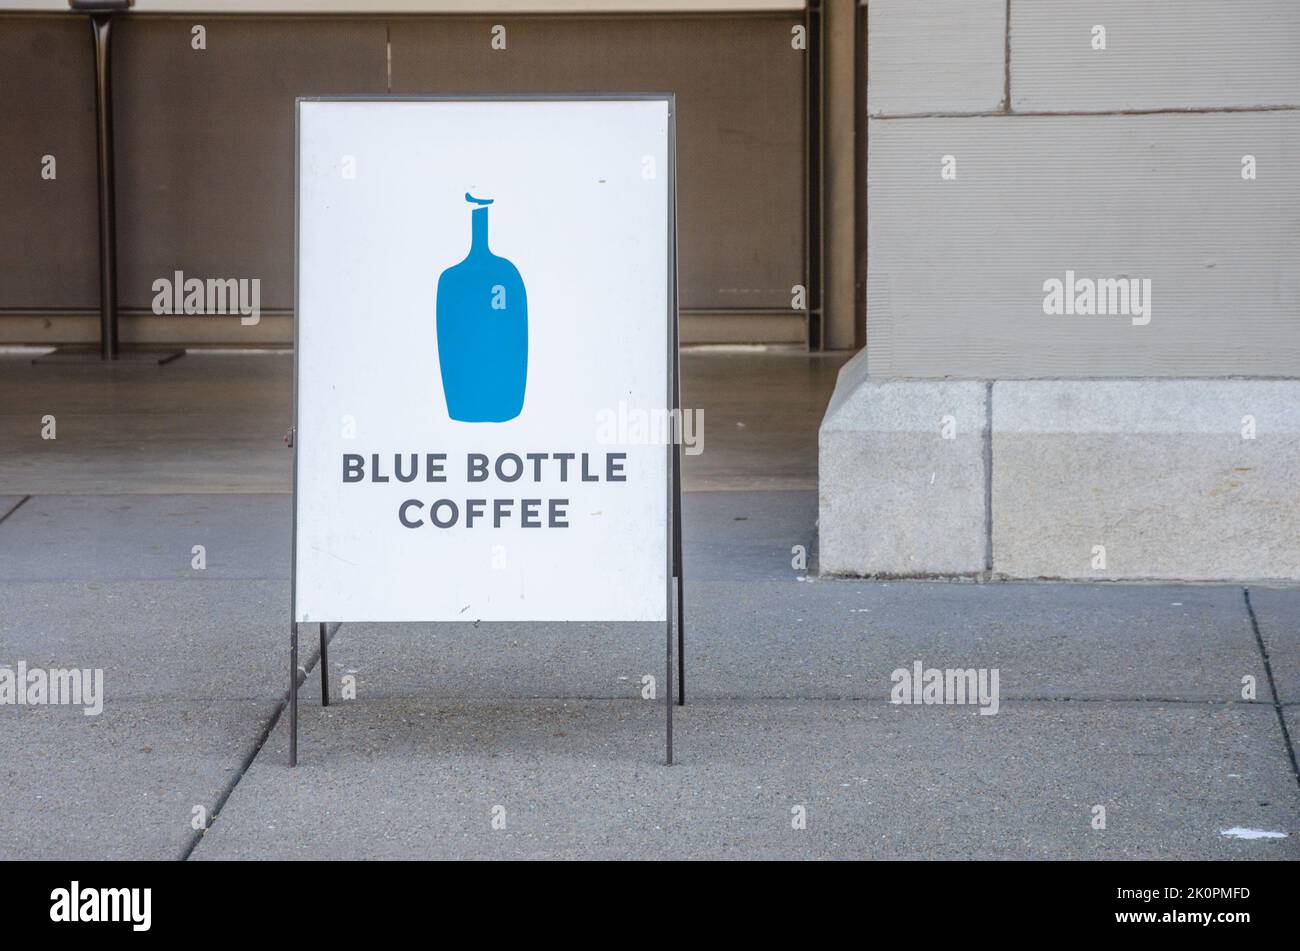 A sign for The Blue Bottle Coffee stands on the pavement alongside Embarcadero in San Francisco, California Stock Photo